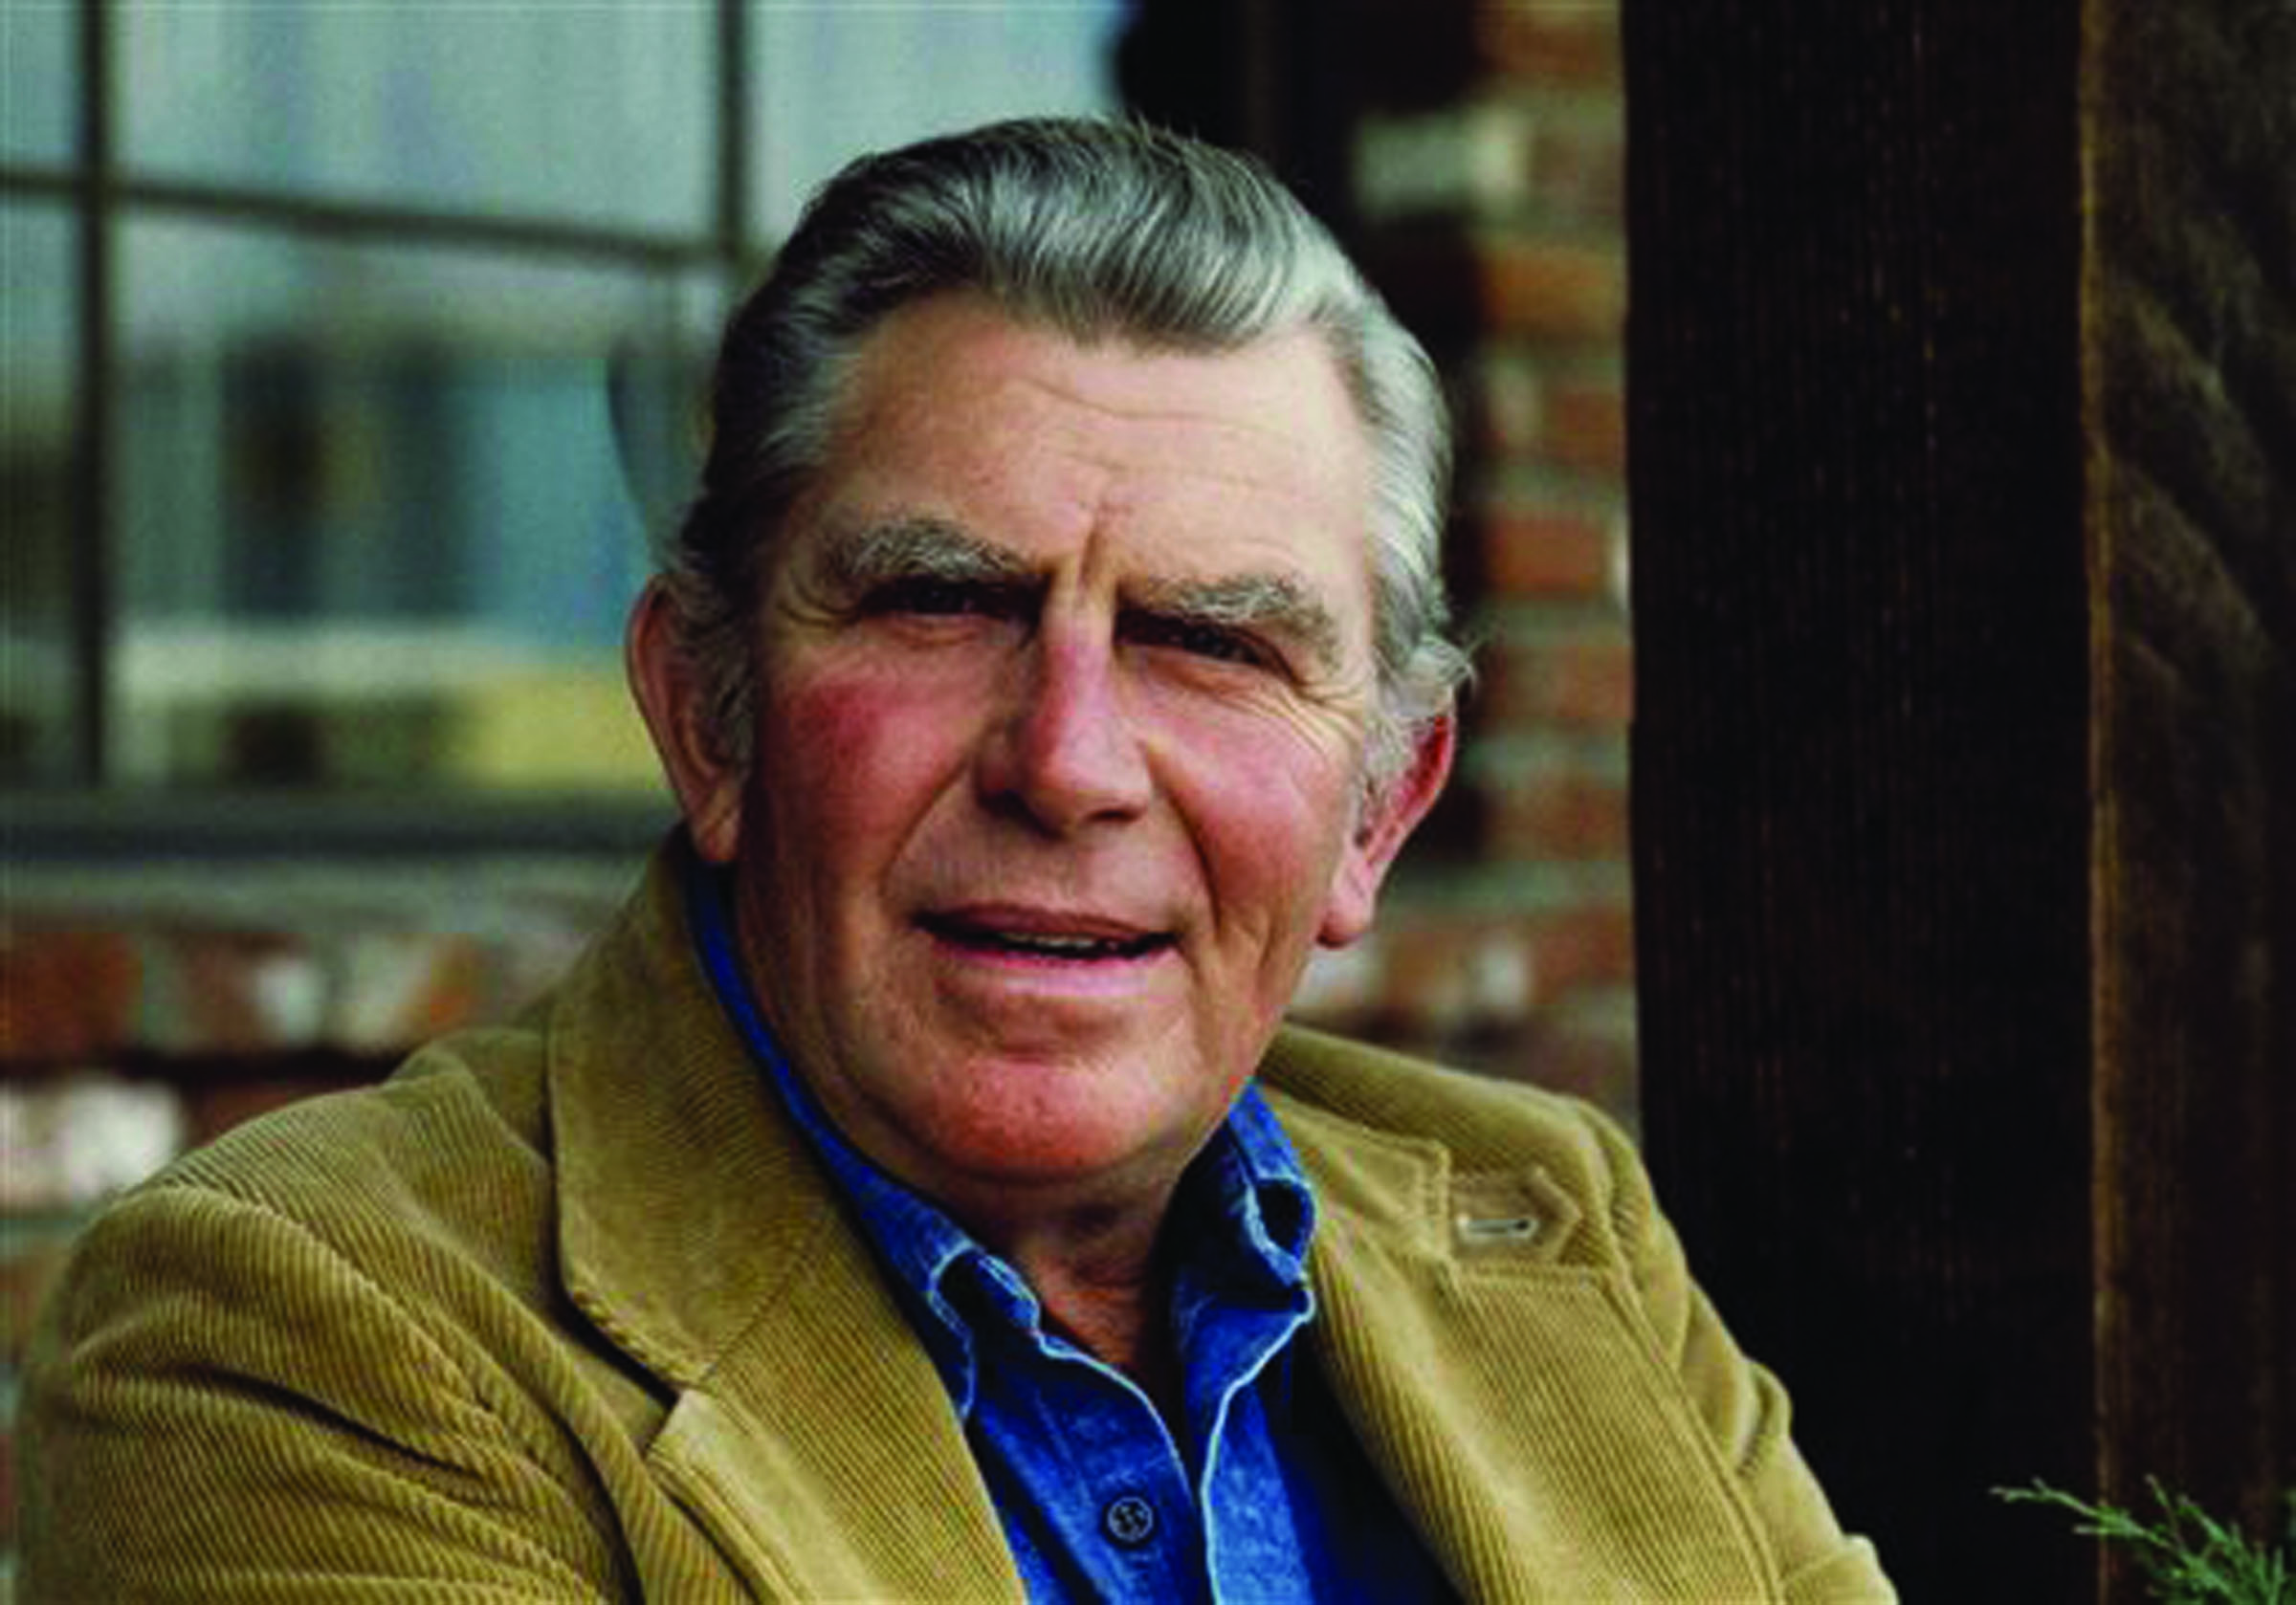 Beloved actor Andy Griffith dies at 86